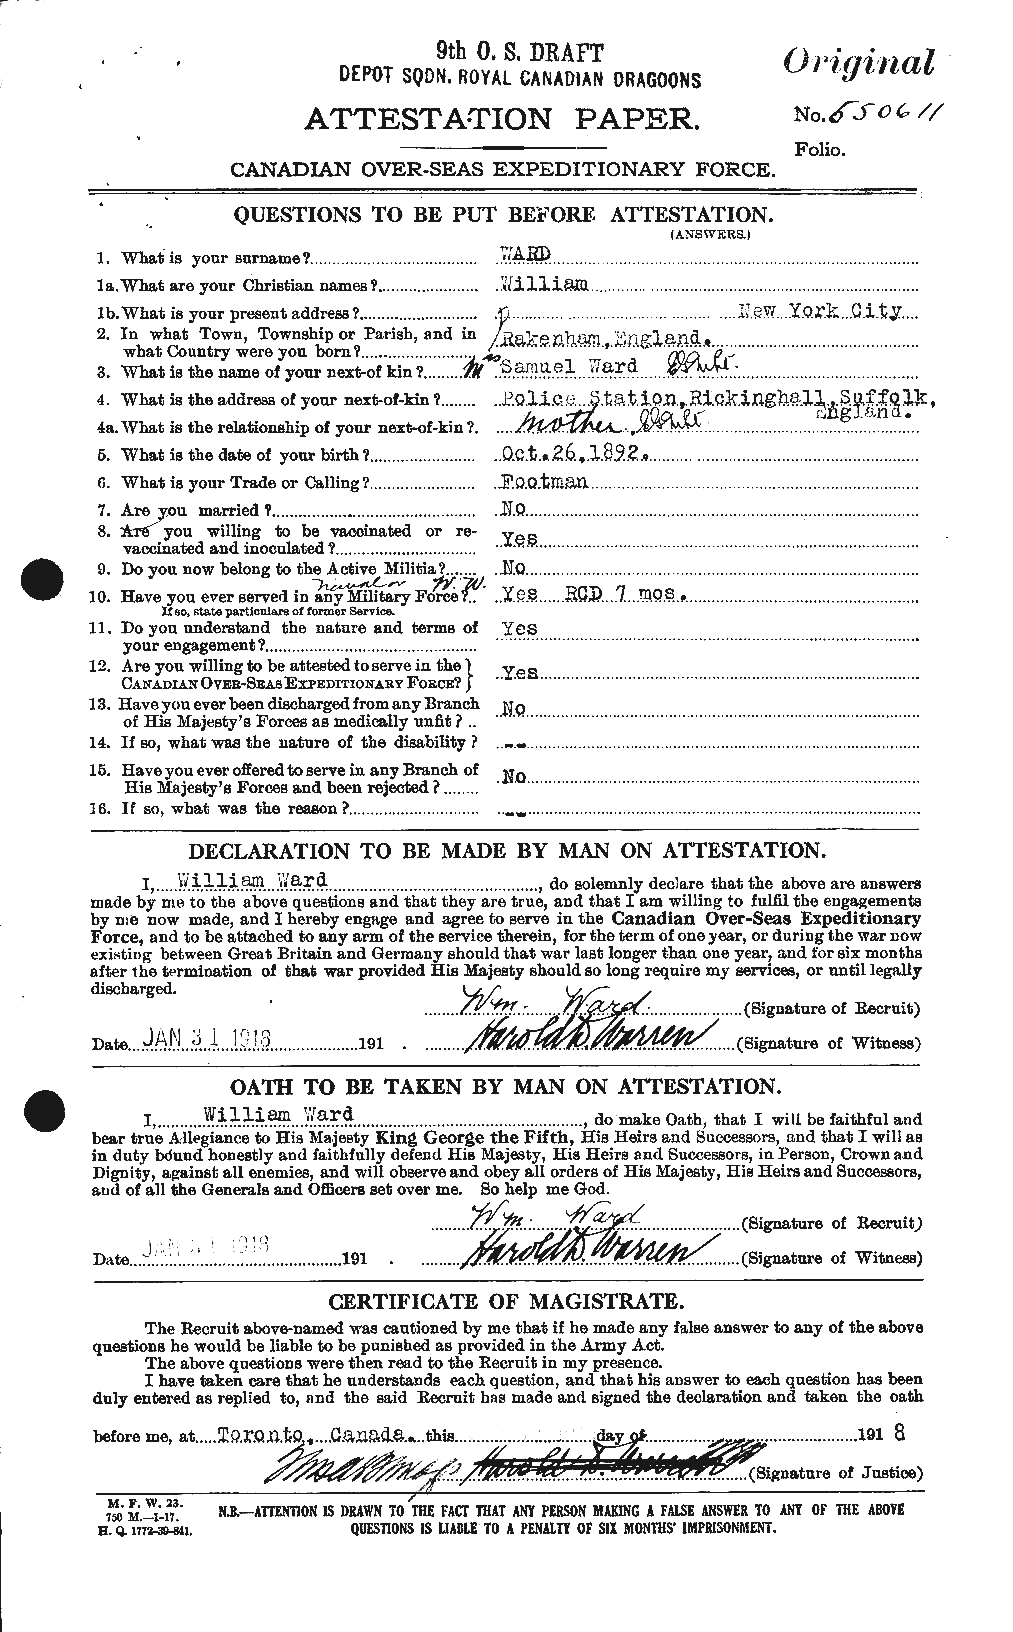 Personnel Records of the First World War - CEF 659786a